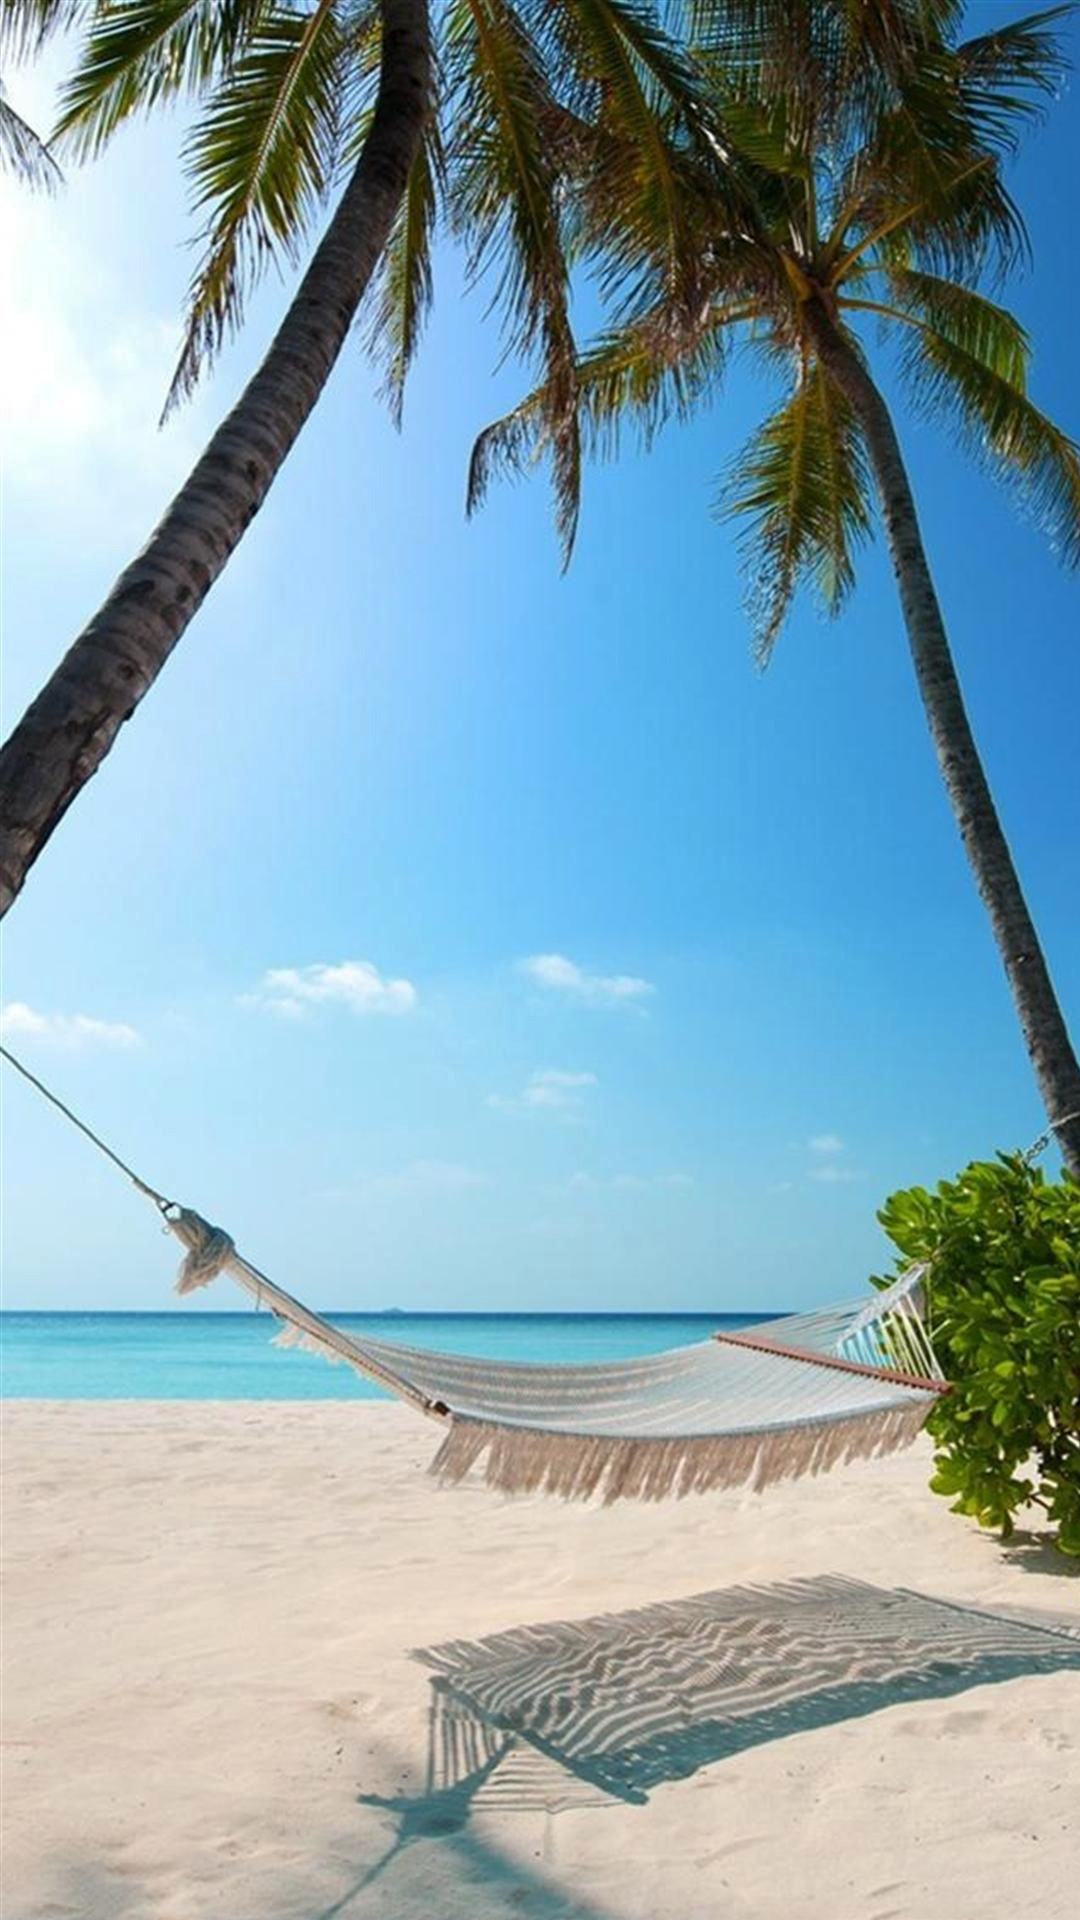 1080x1920 Exotic Beach Palm Trees Hammock Android Wallpaper ...